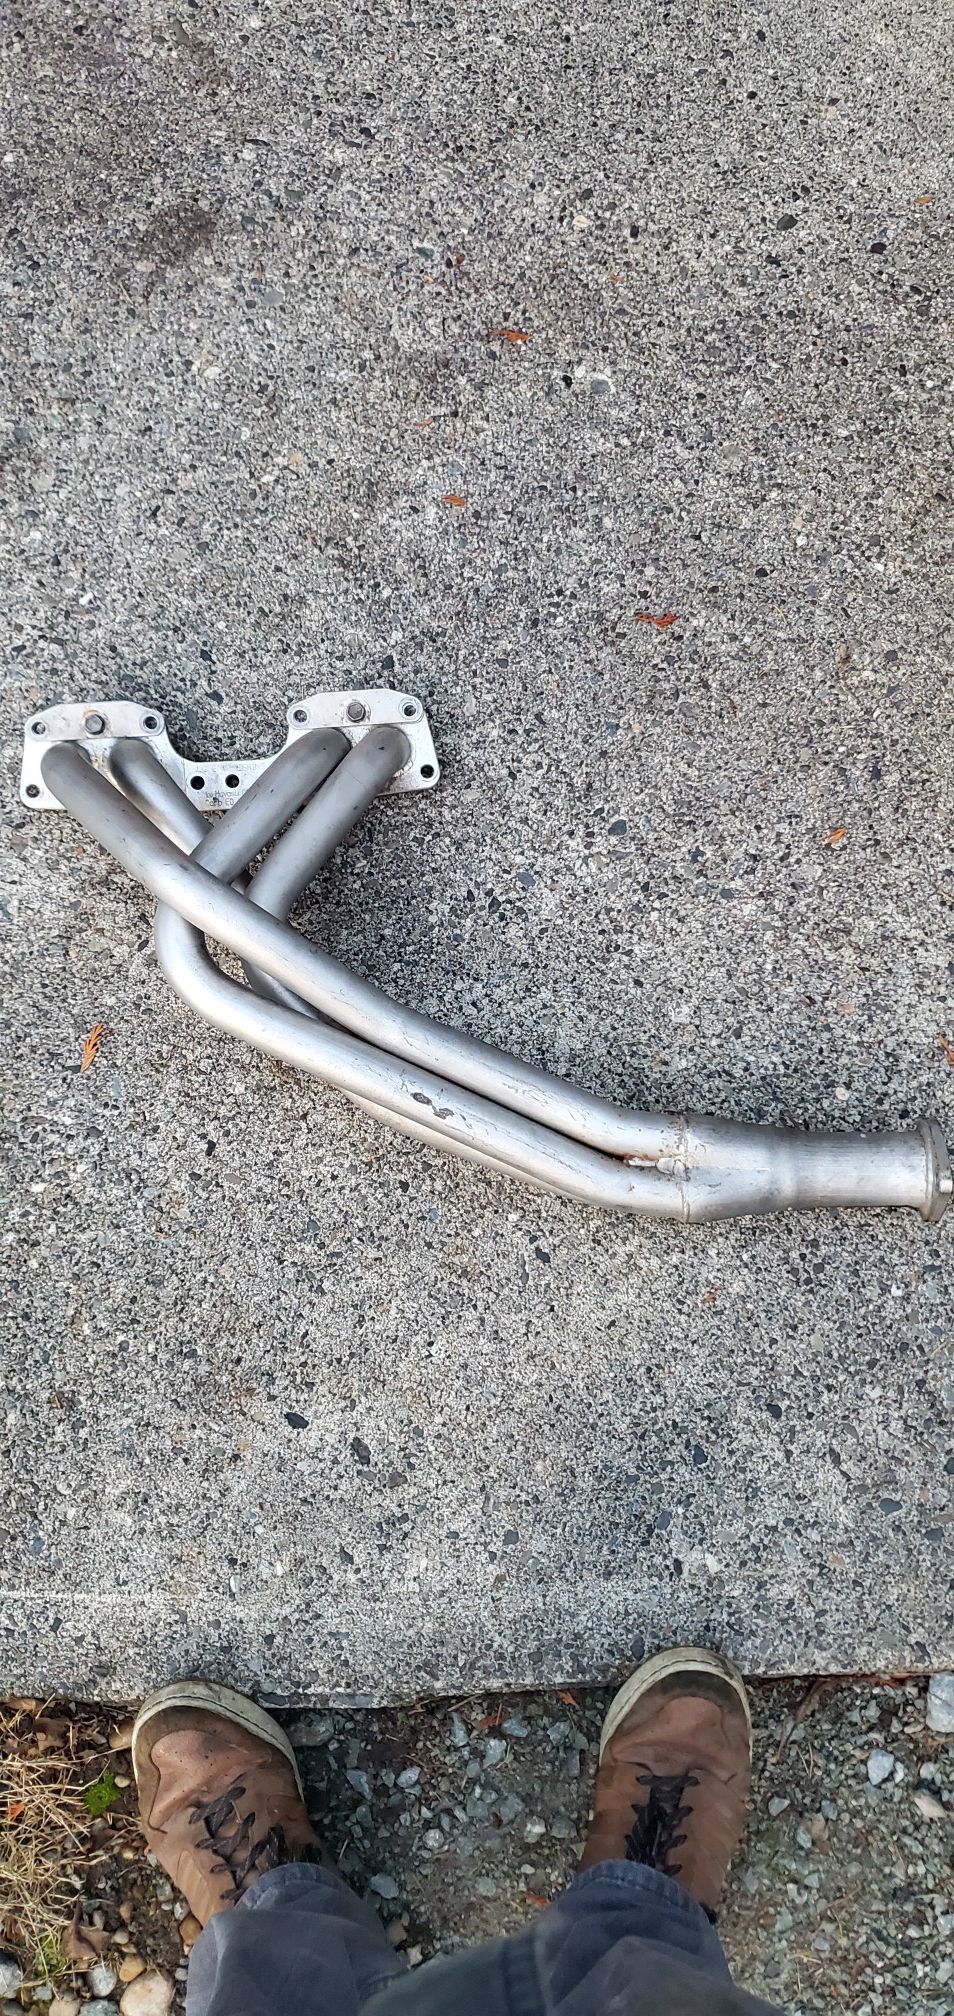 Toyota pickup 22r/22re exhaust manifold, LC engineering